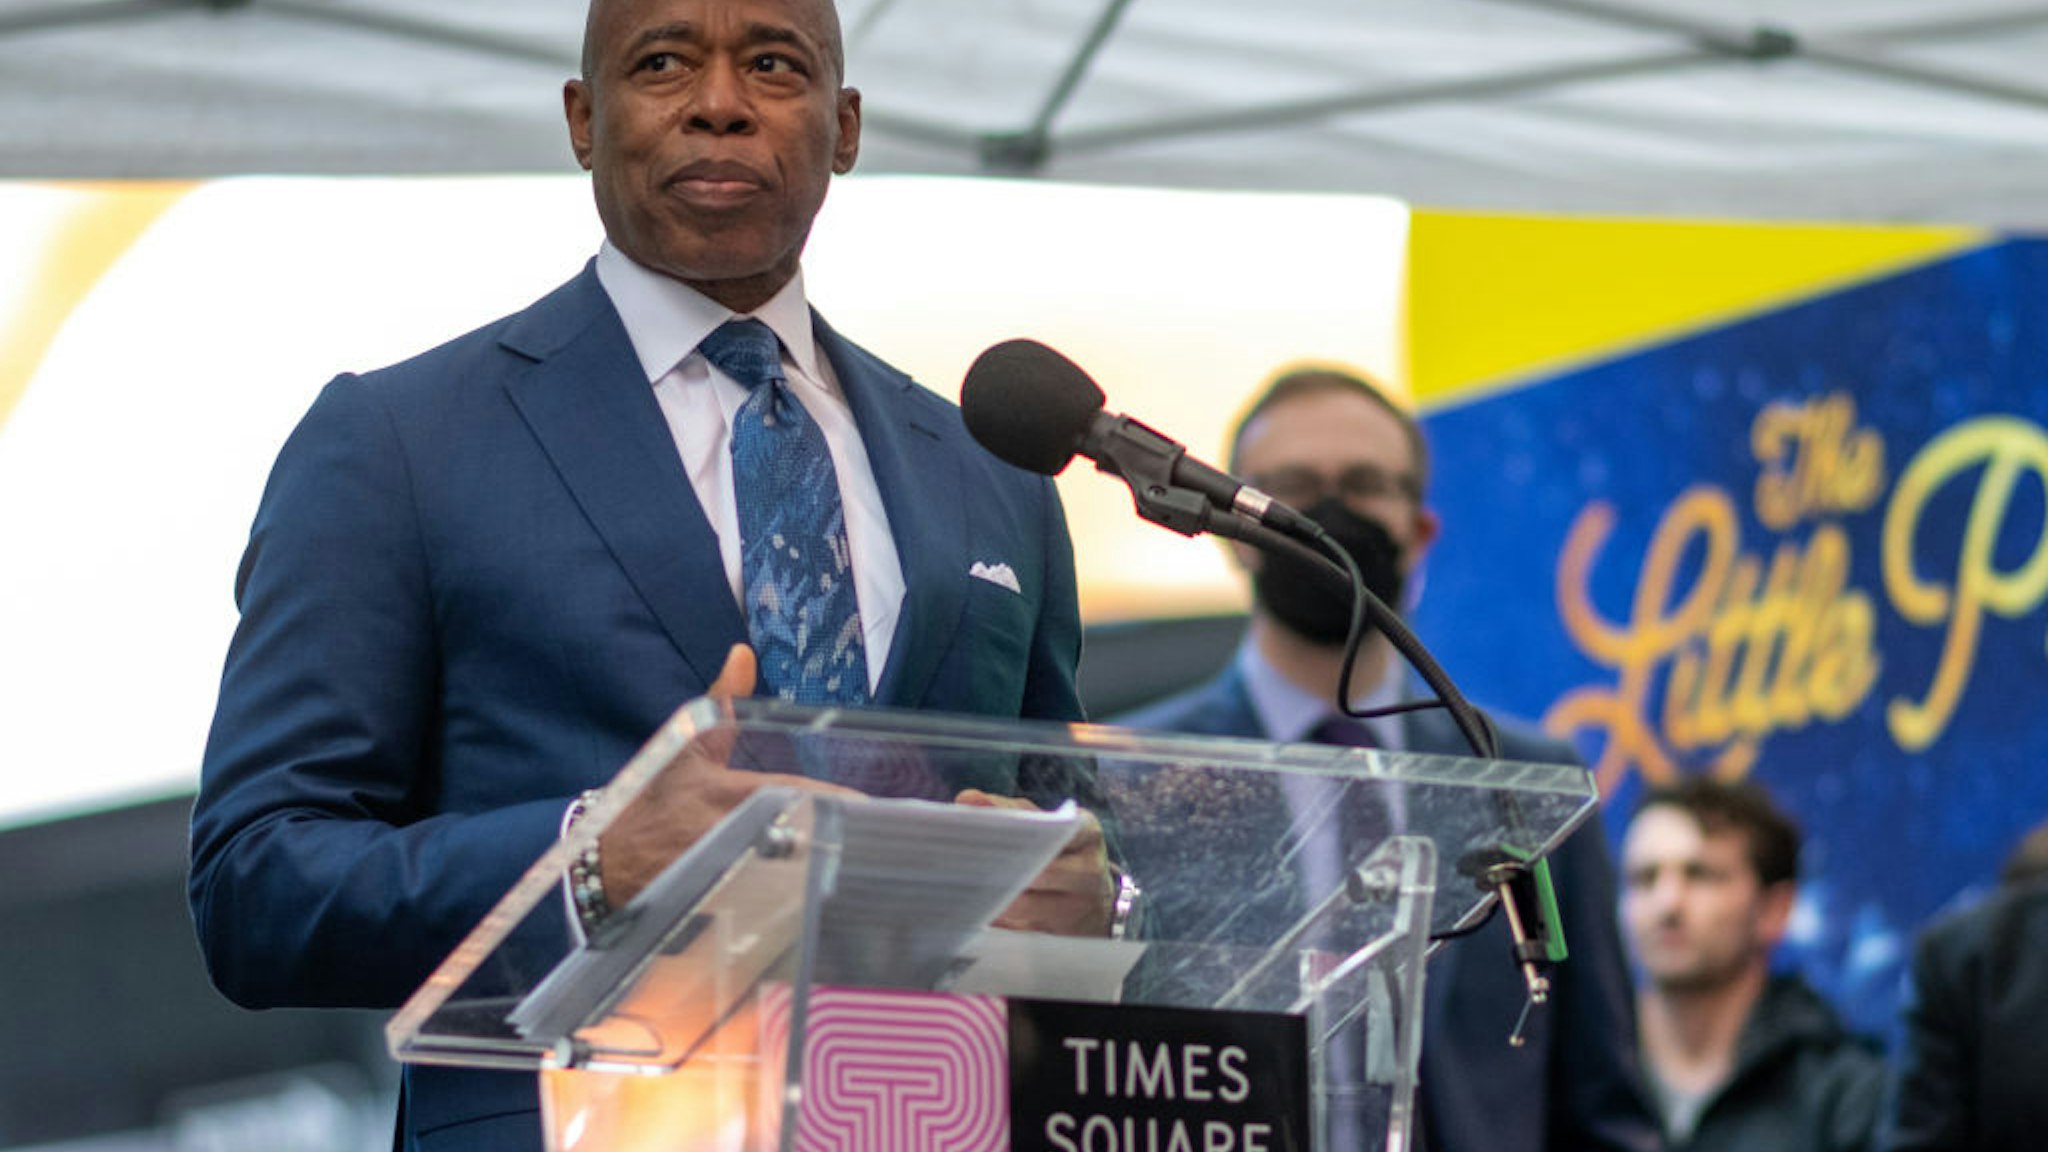 New York City Mayor Eric Adams speaks during the unveiling at The Broadway Grand Gallery in Times Square on April 07, 2022 in New York City. Twenty-one playbill monoliths are on display at ten feet tall, six feet wide and three feet deep. The gallery will be on display until June 15th.